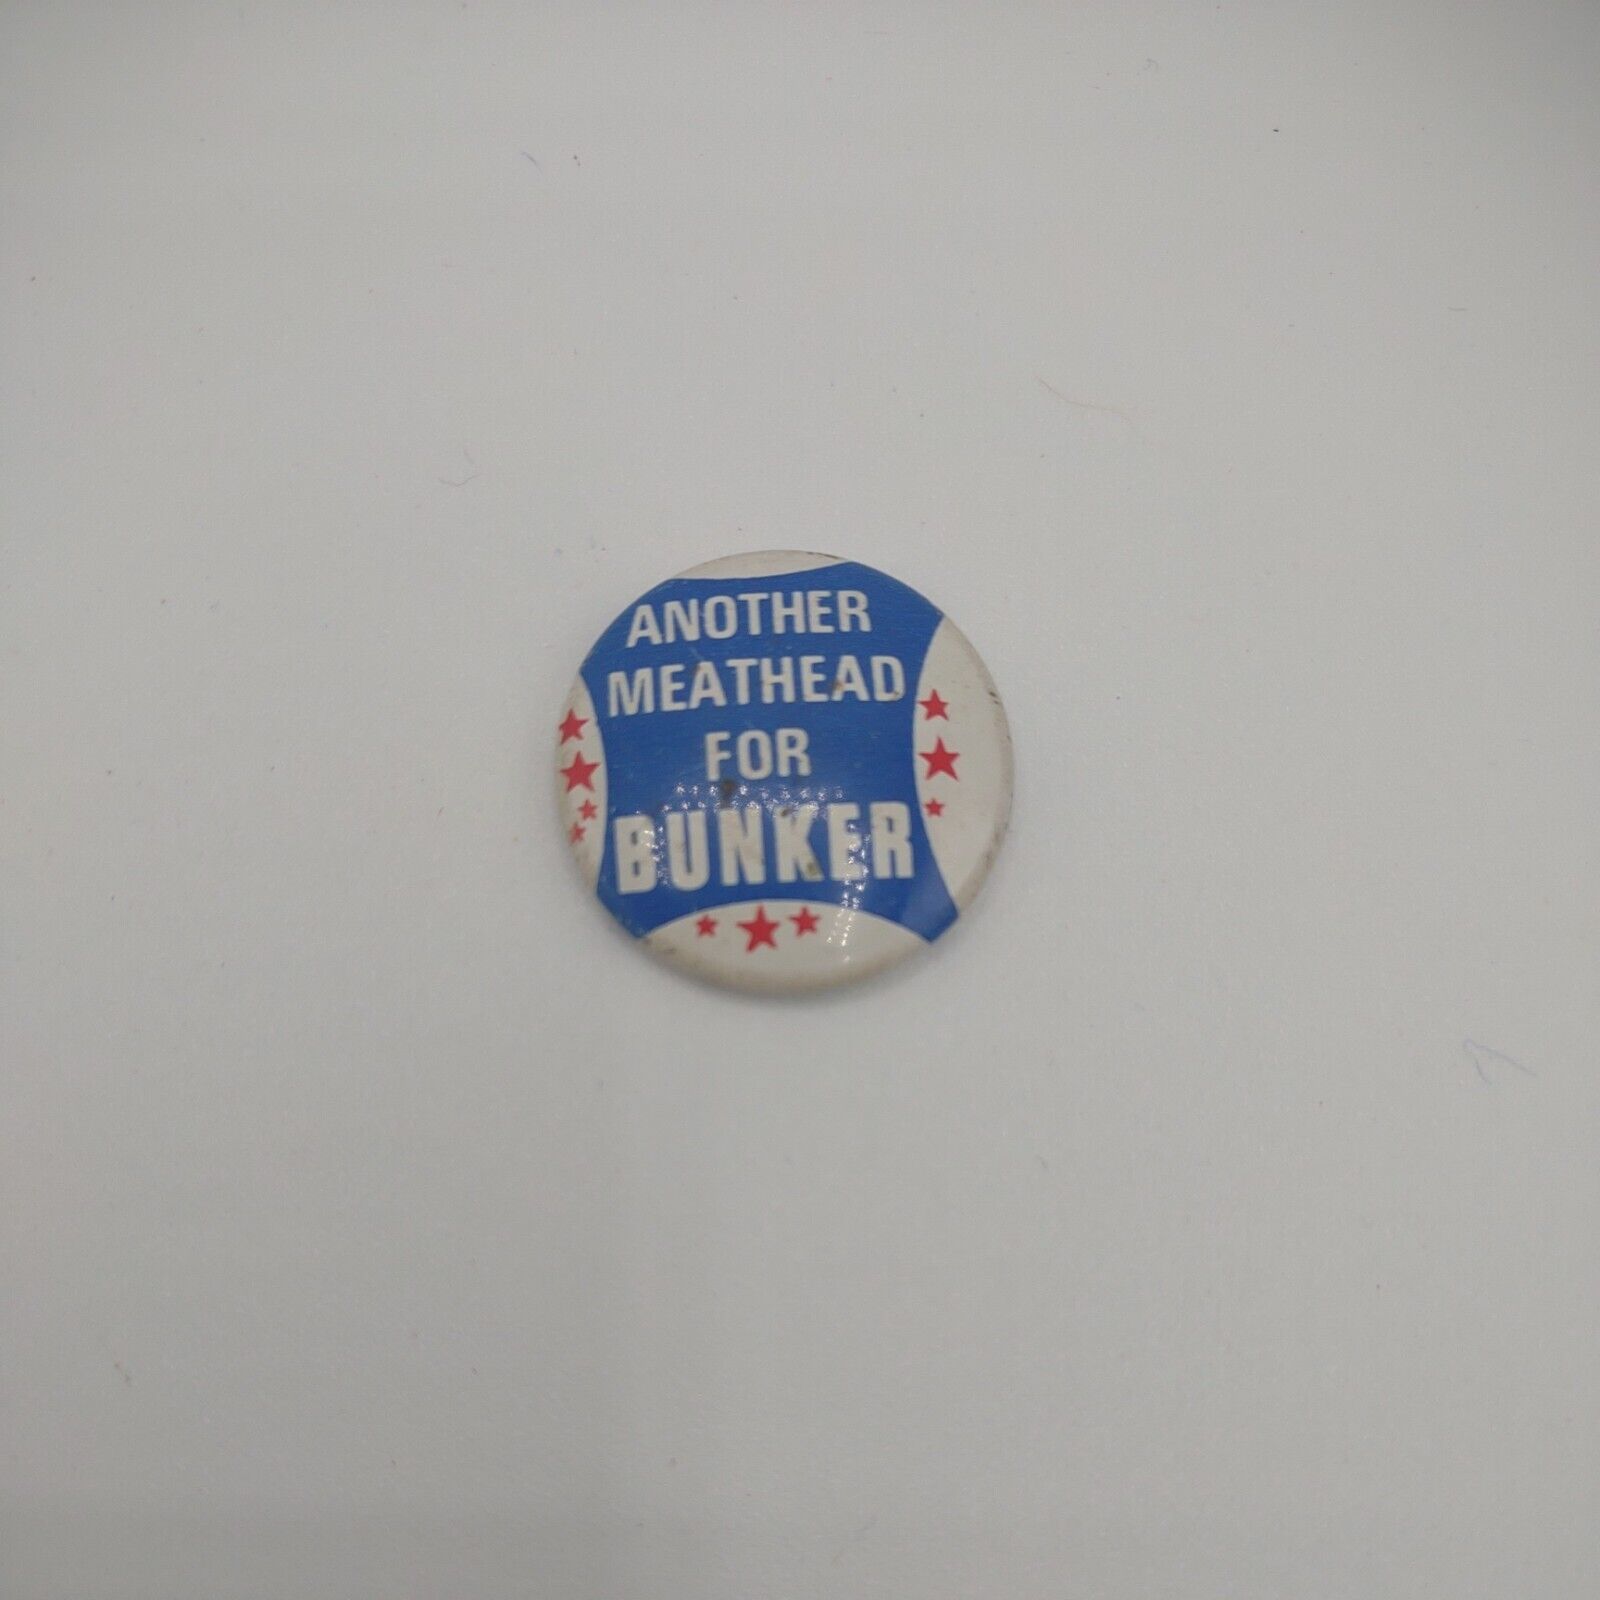 Vtg 1972 Archie Bunker President Another Meathead Spoof Buttons All In Family Tv